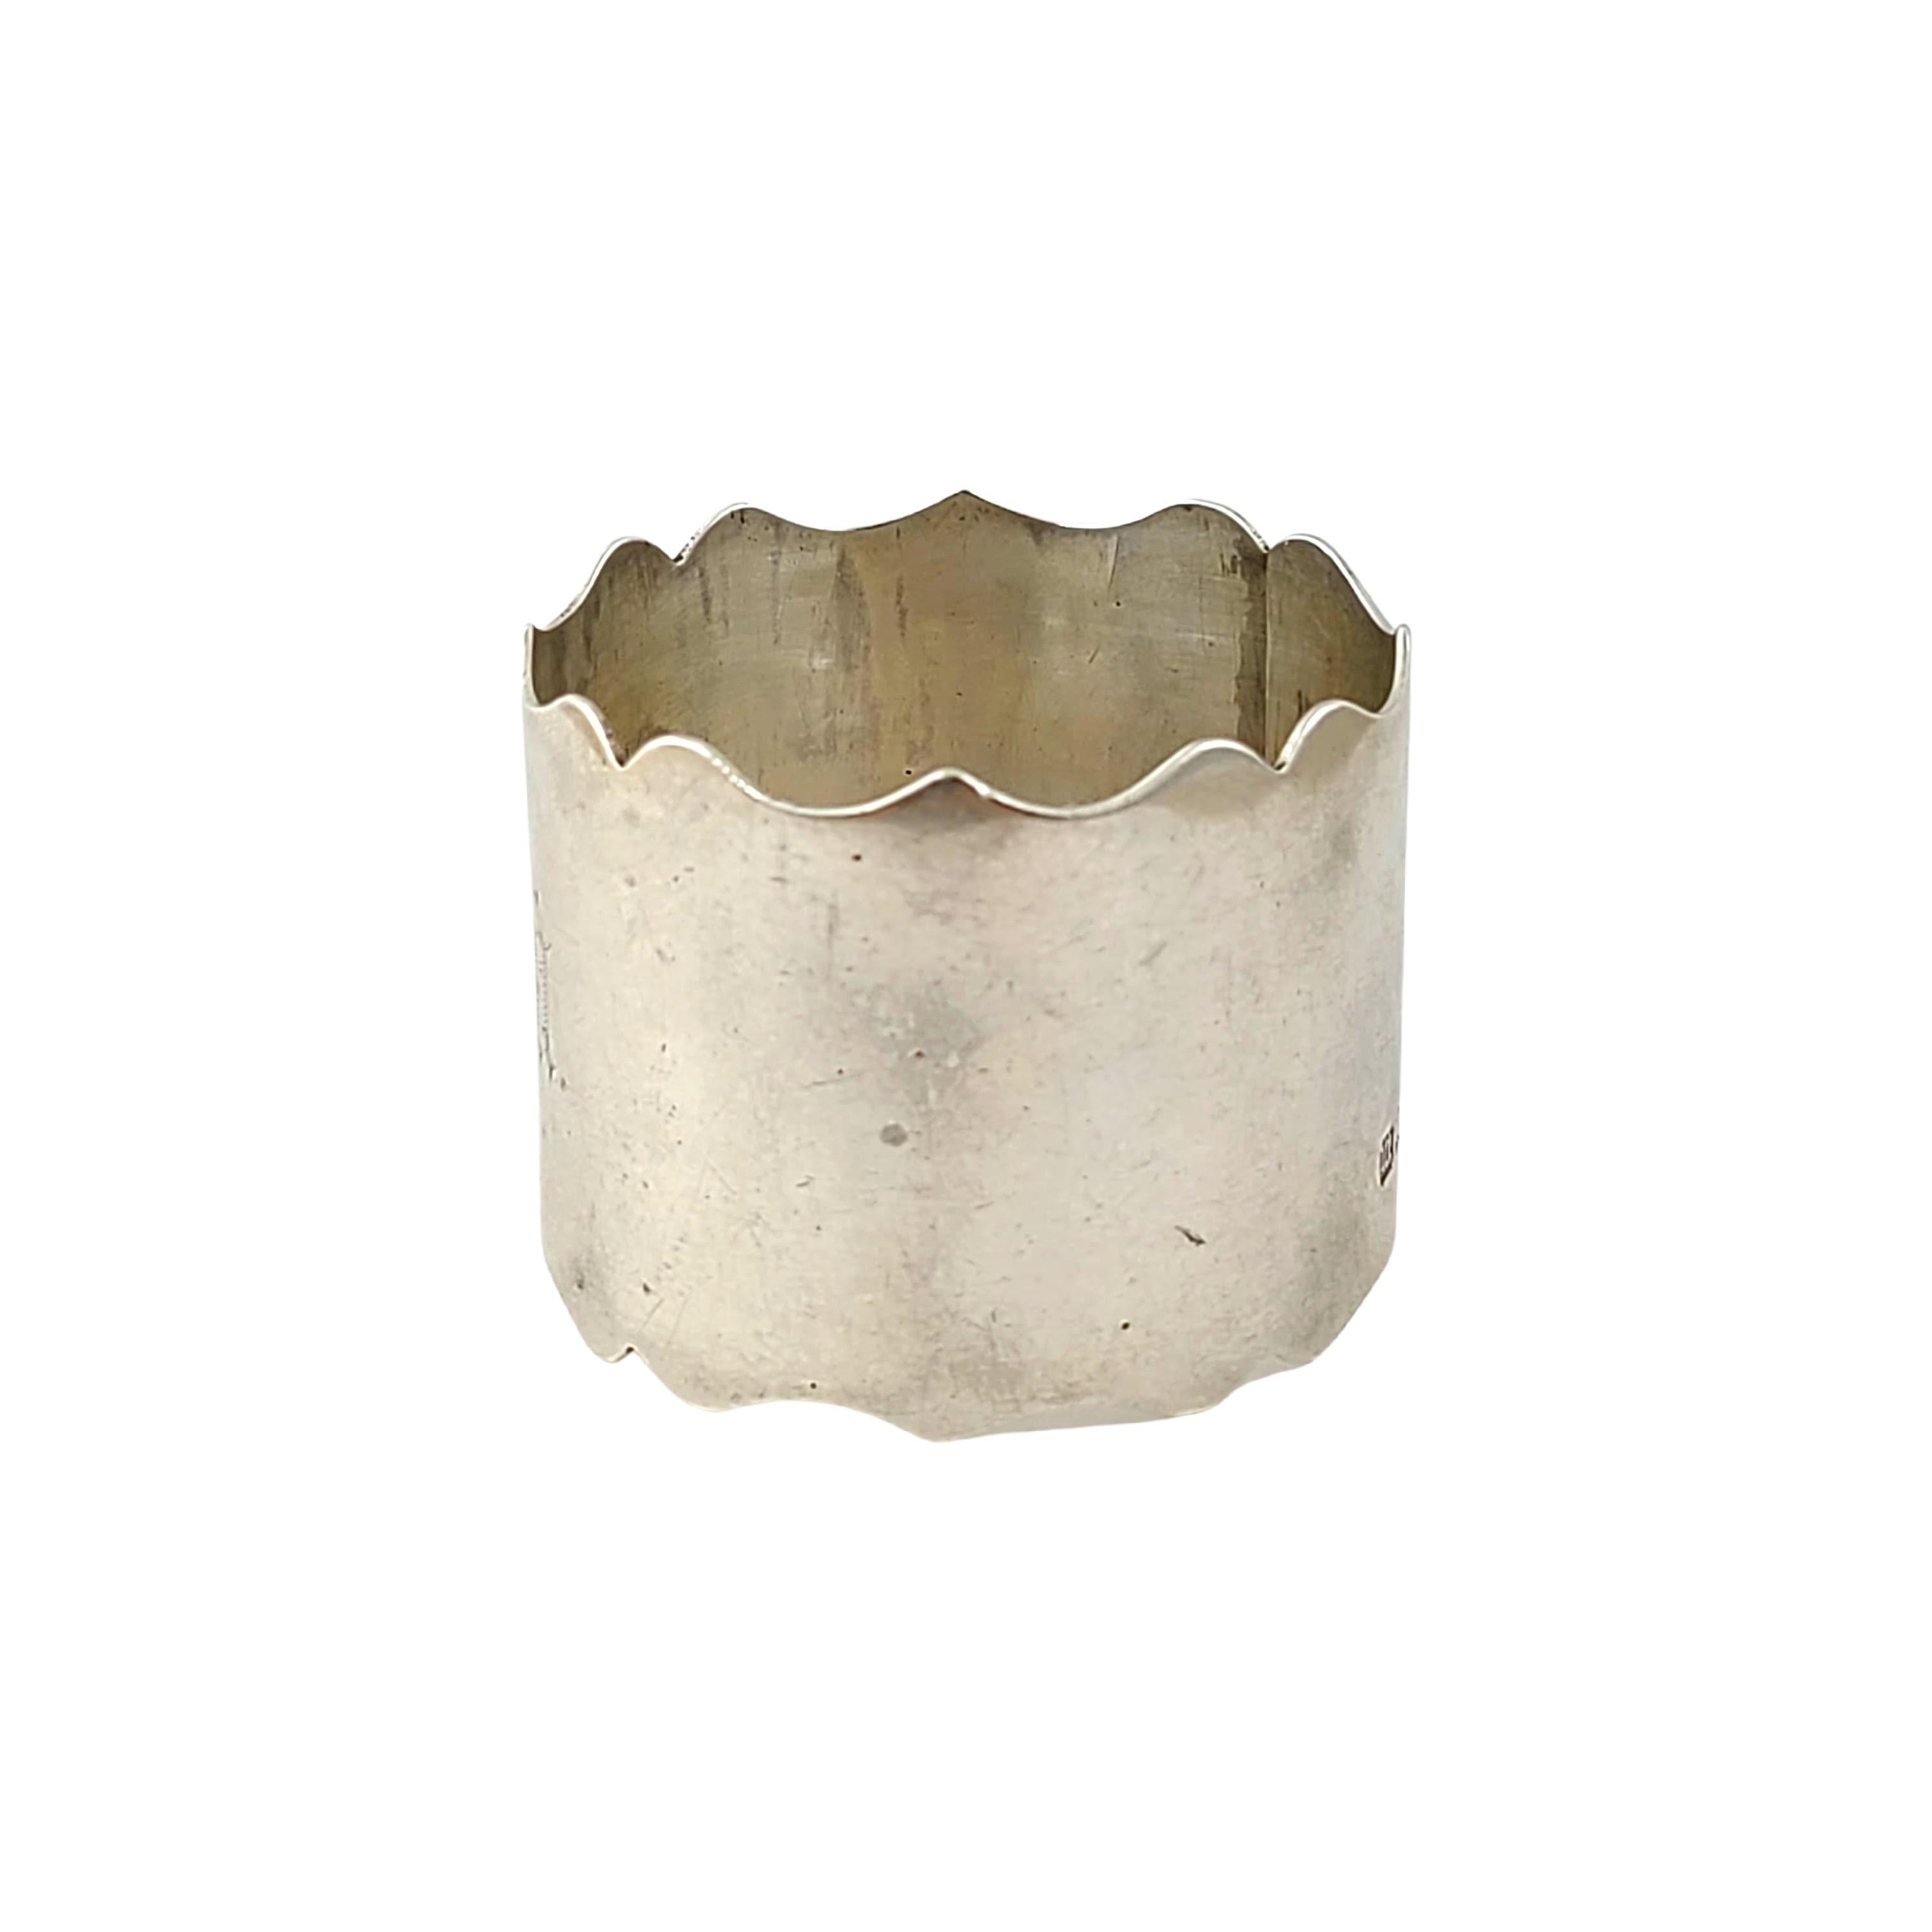 Sterling silver napkin ring by Richard Richardson of Sheffield, circa 1904.

Monogram appears to be EGM

Scalloped edges with a polished finish. 

Measures 1 3/8